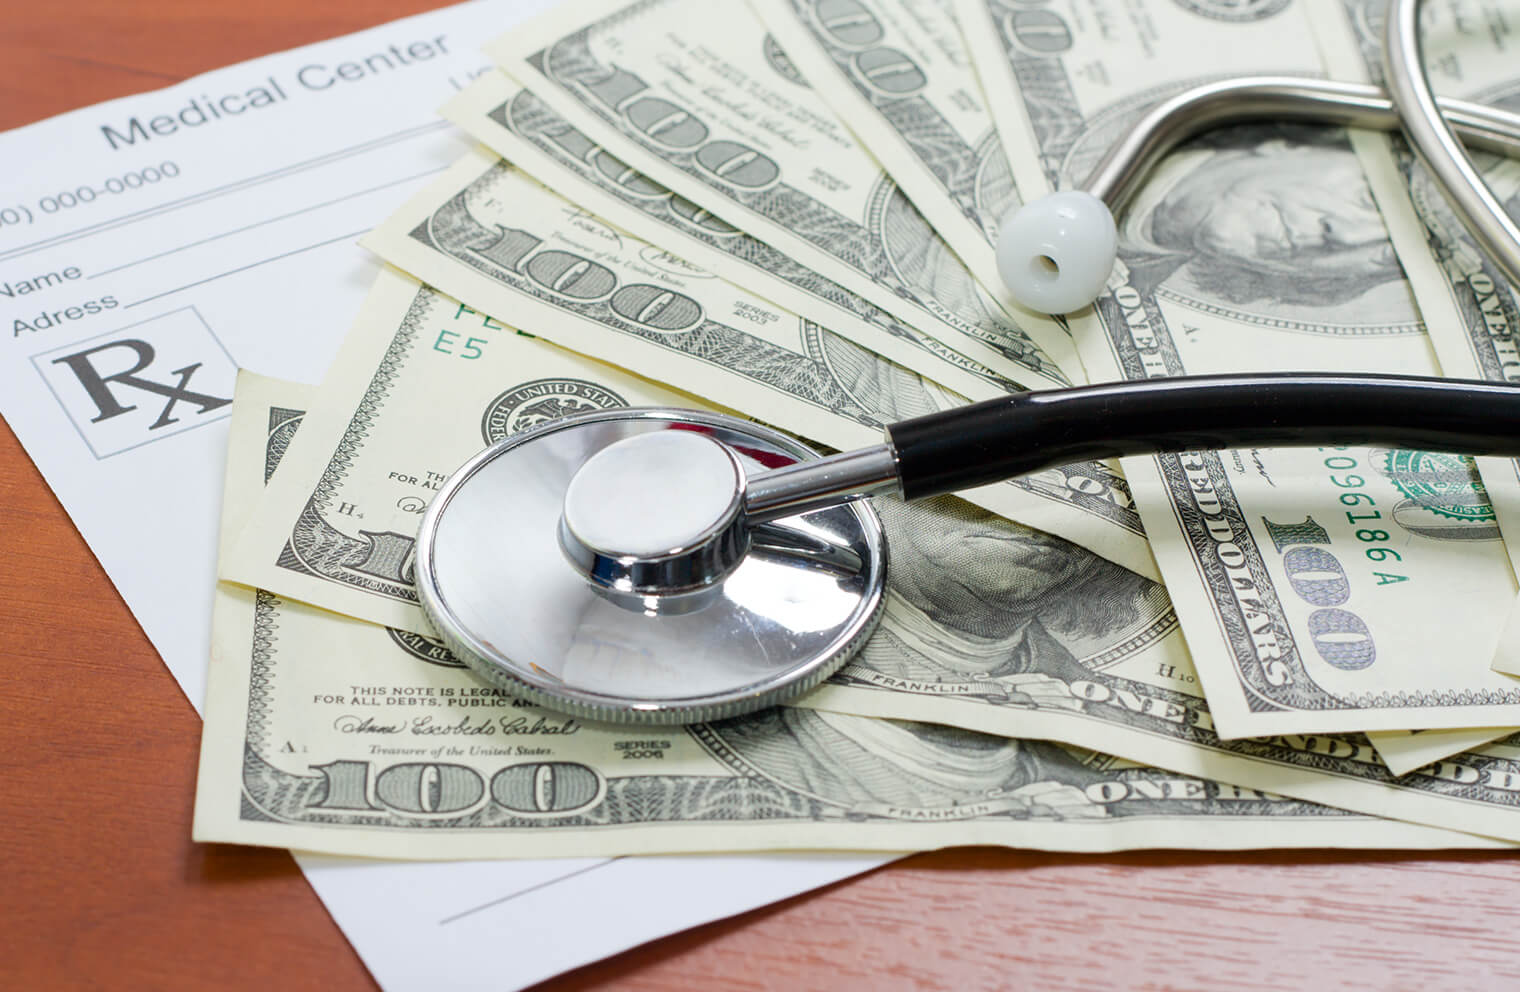 Close up picture of a stethoscope on top of $100 bills and a prescription note.